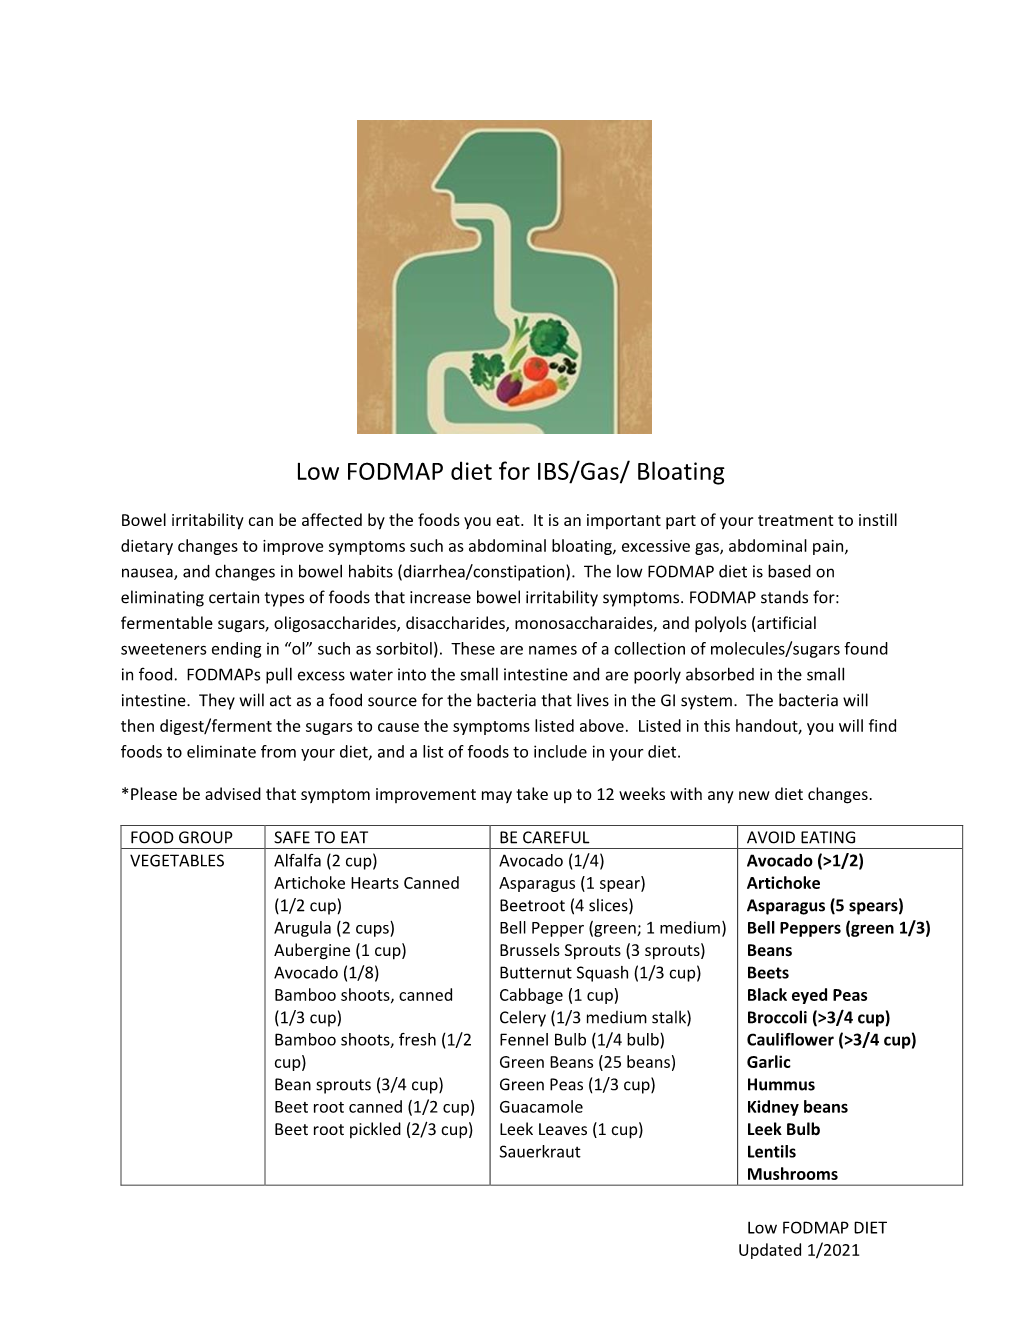 Low FODMAP Diet for IBS/Gas/ Bloating